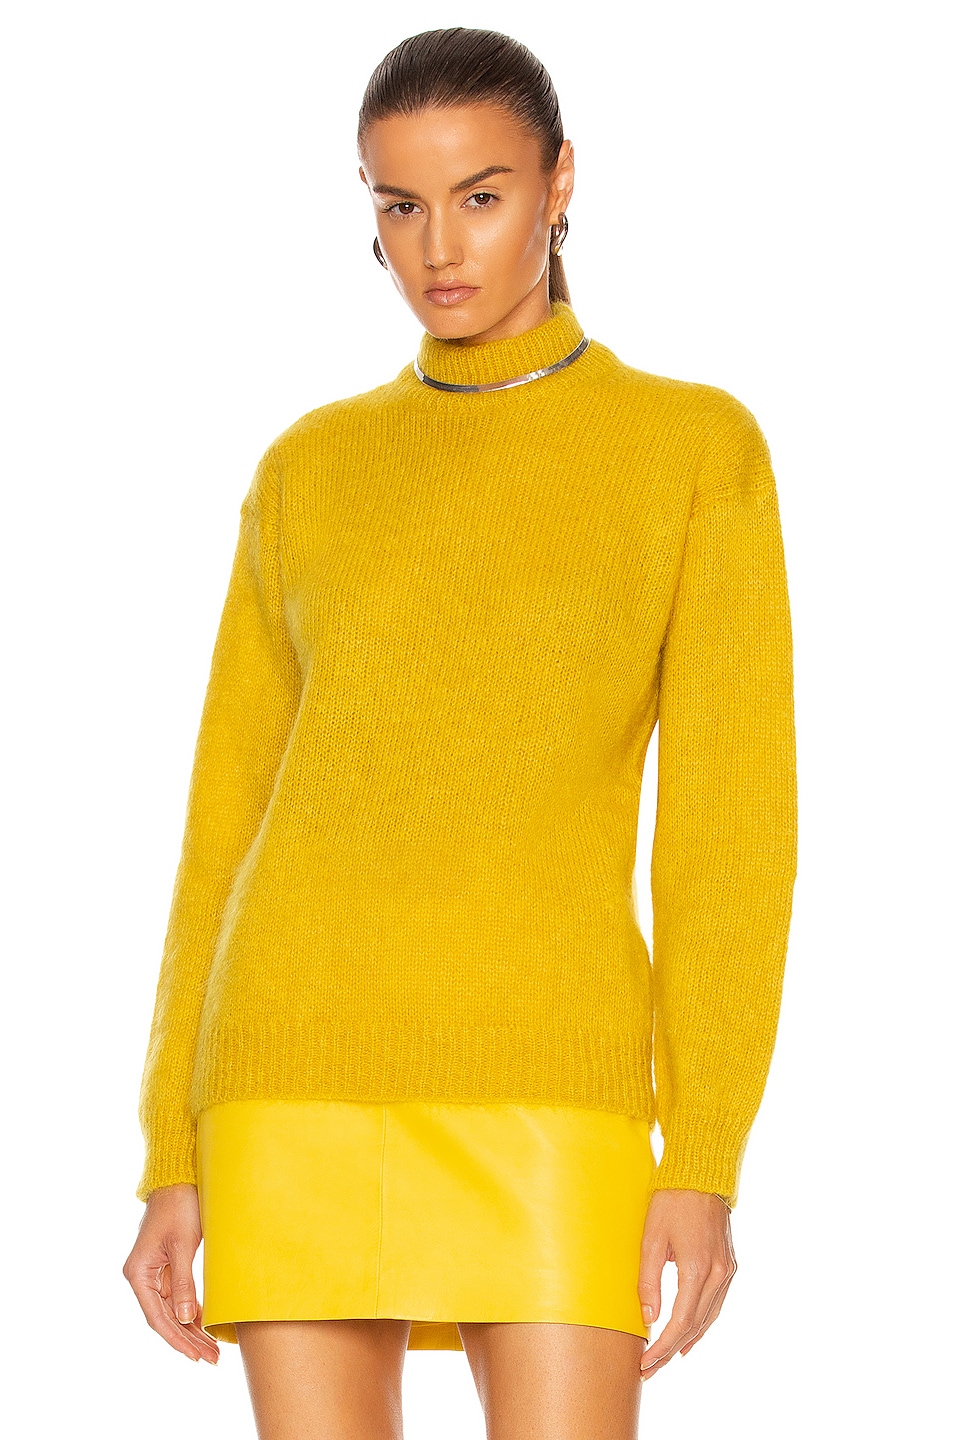 TOM FORD Brushed Mohair Mock Neck Sweater in Mustard | FWRD